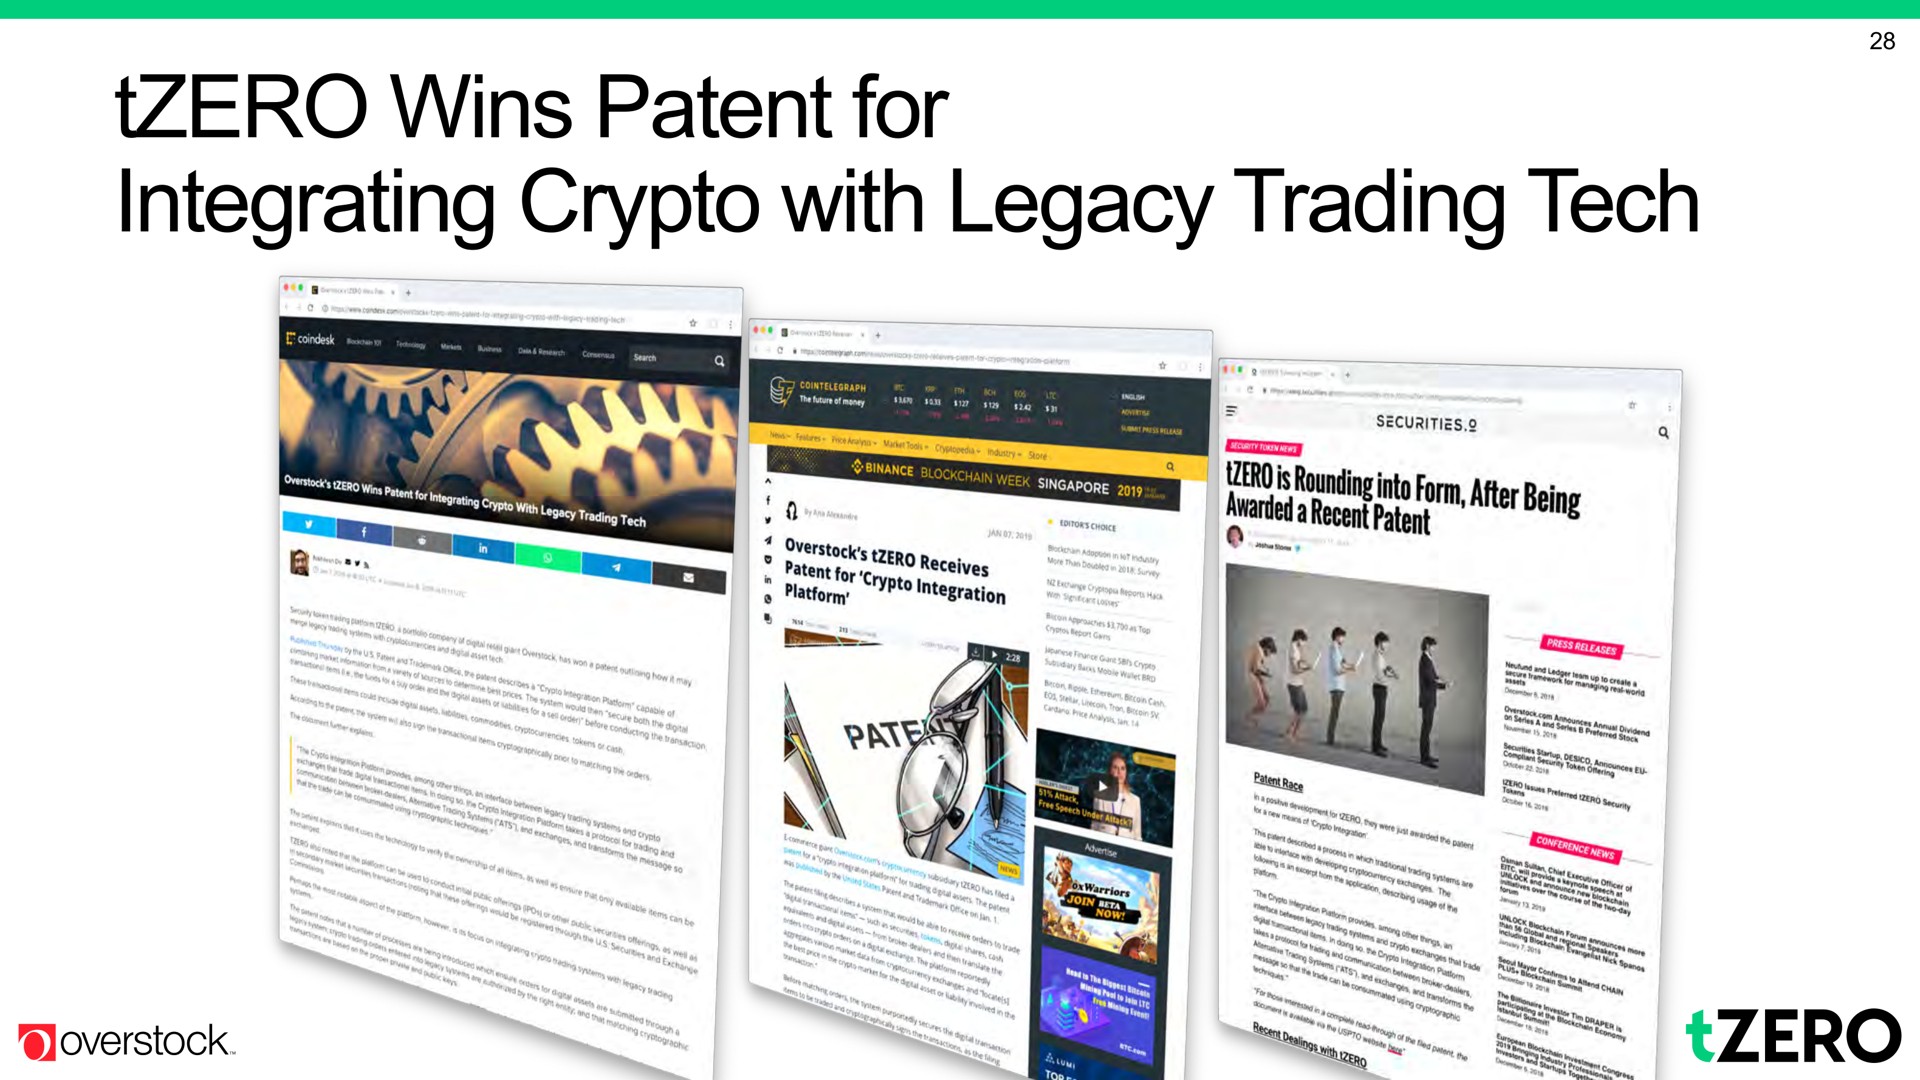 wins patent for integrating with legacy trading tech | Overstock